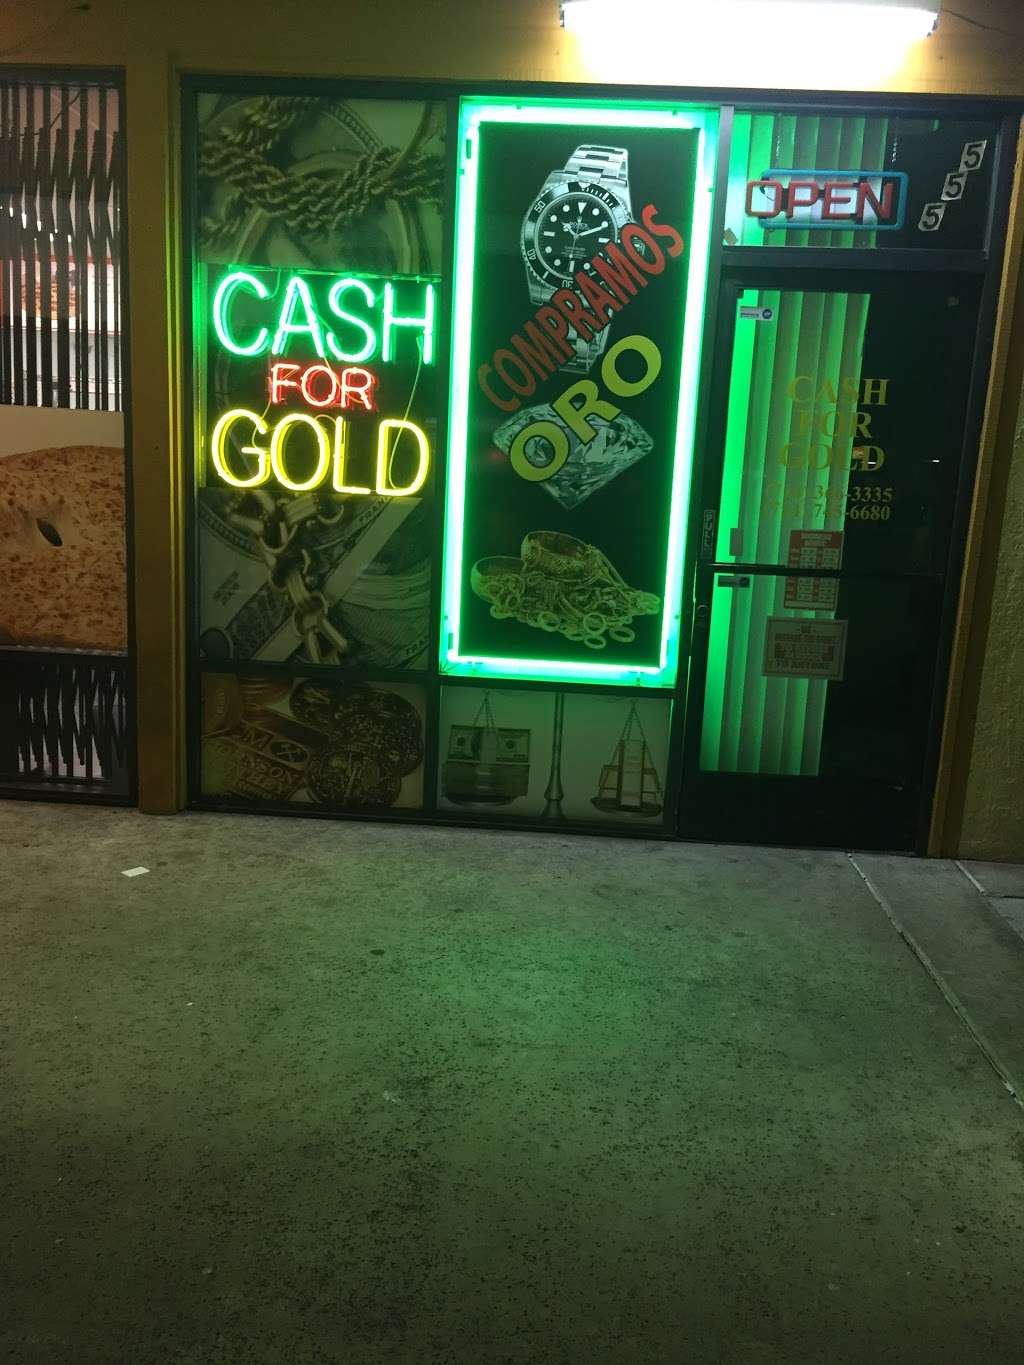 Cash for Gold | 555 S Knott Ave, Anaheim, CA 92804 | Phone: (714) 745-6680